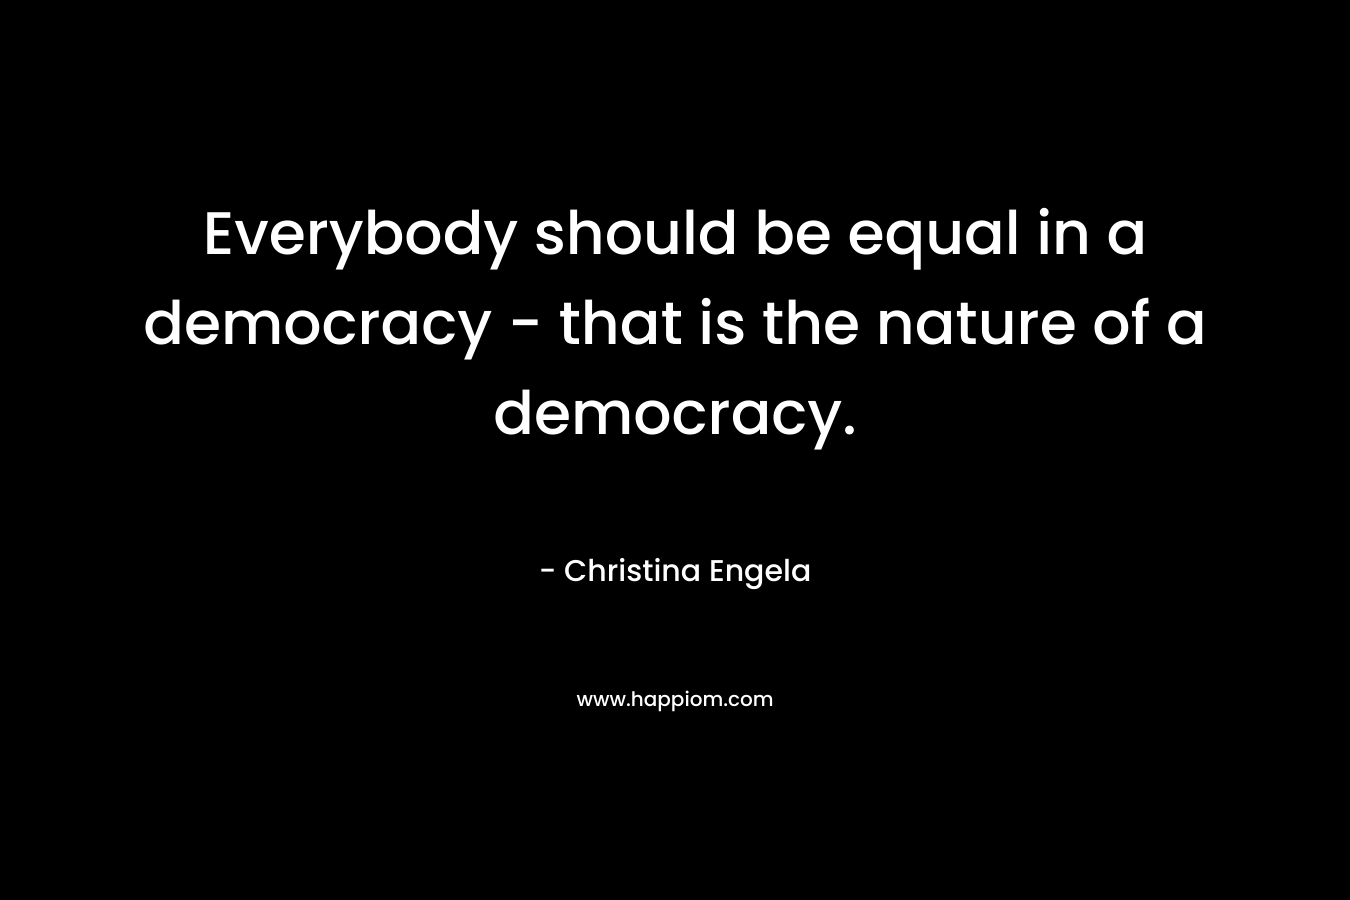 Everybody should be equal in a democracy - that is the nature of a democracy.